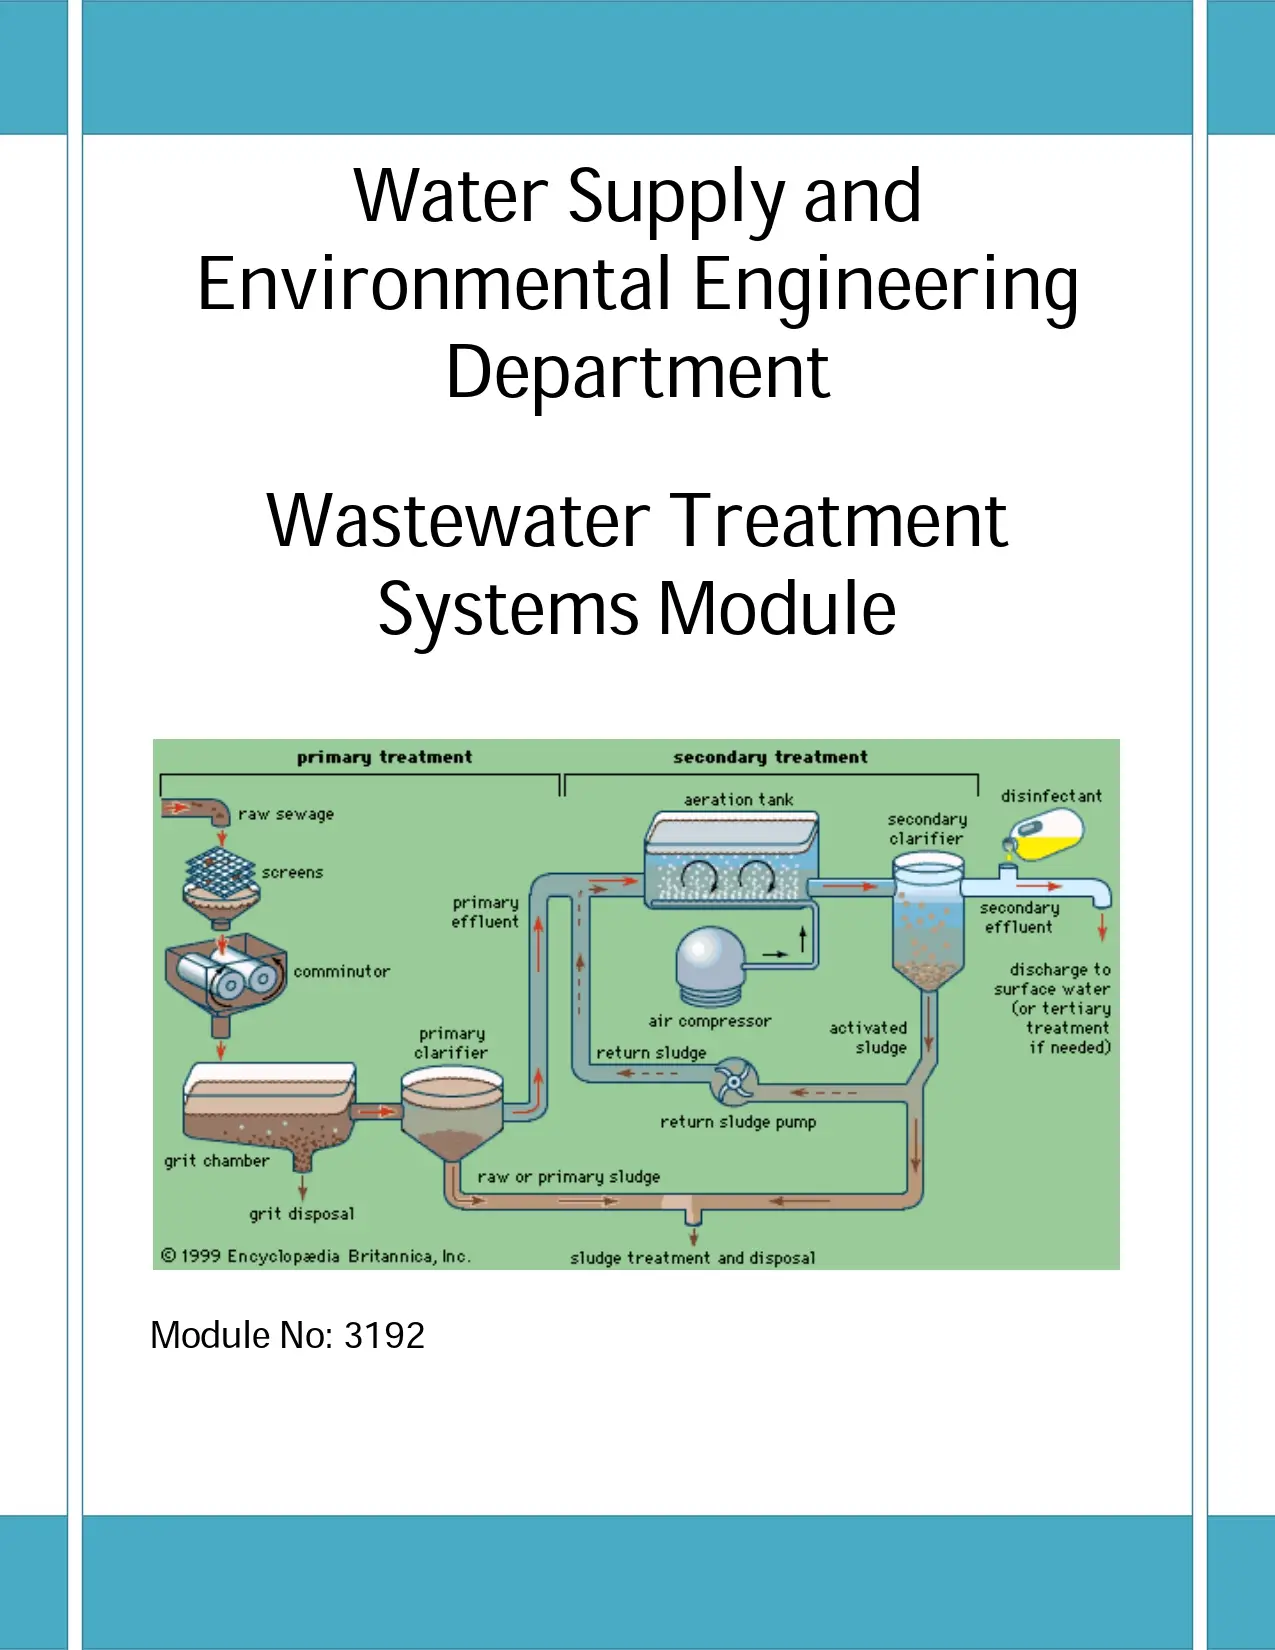 Wastewater Treatment Systems Module